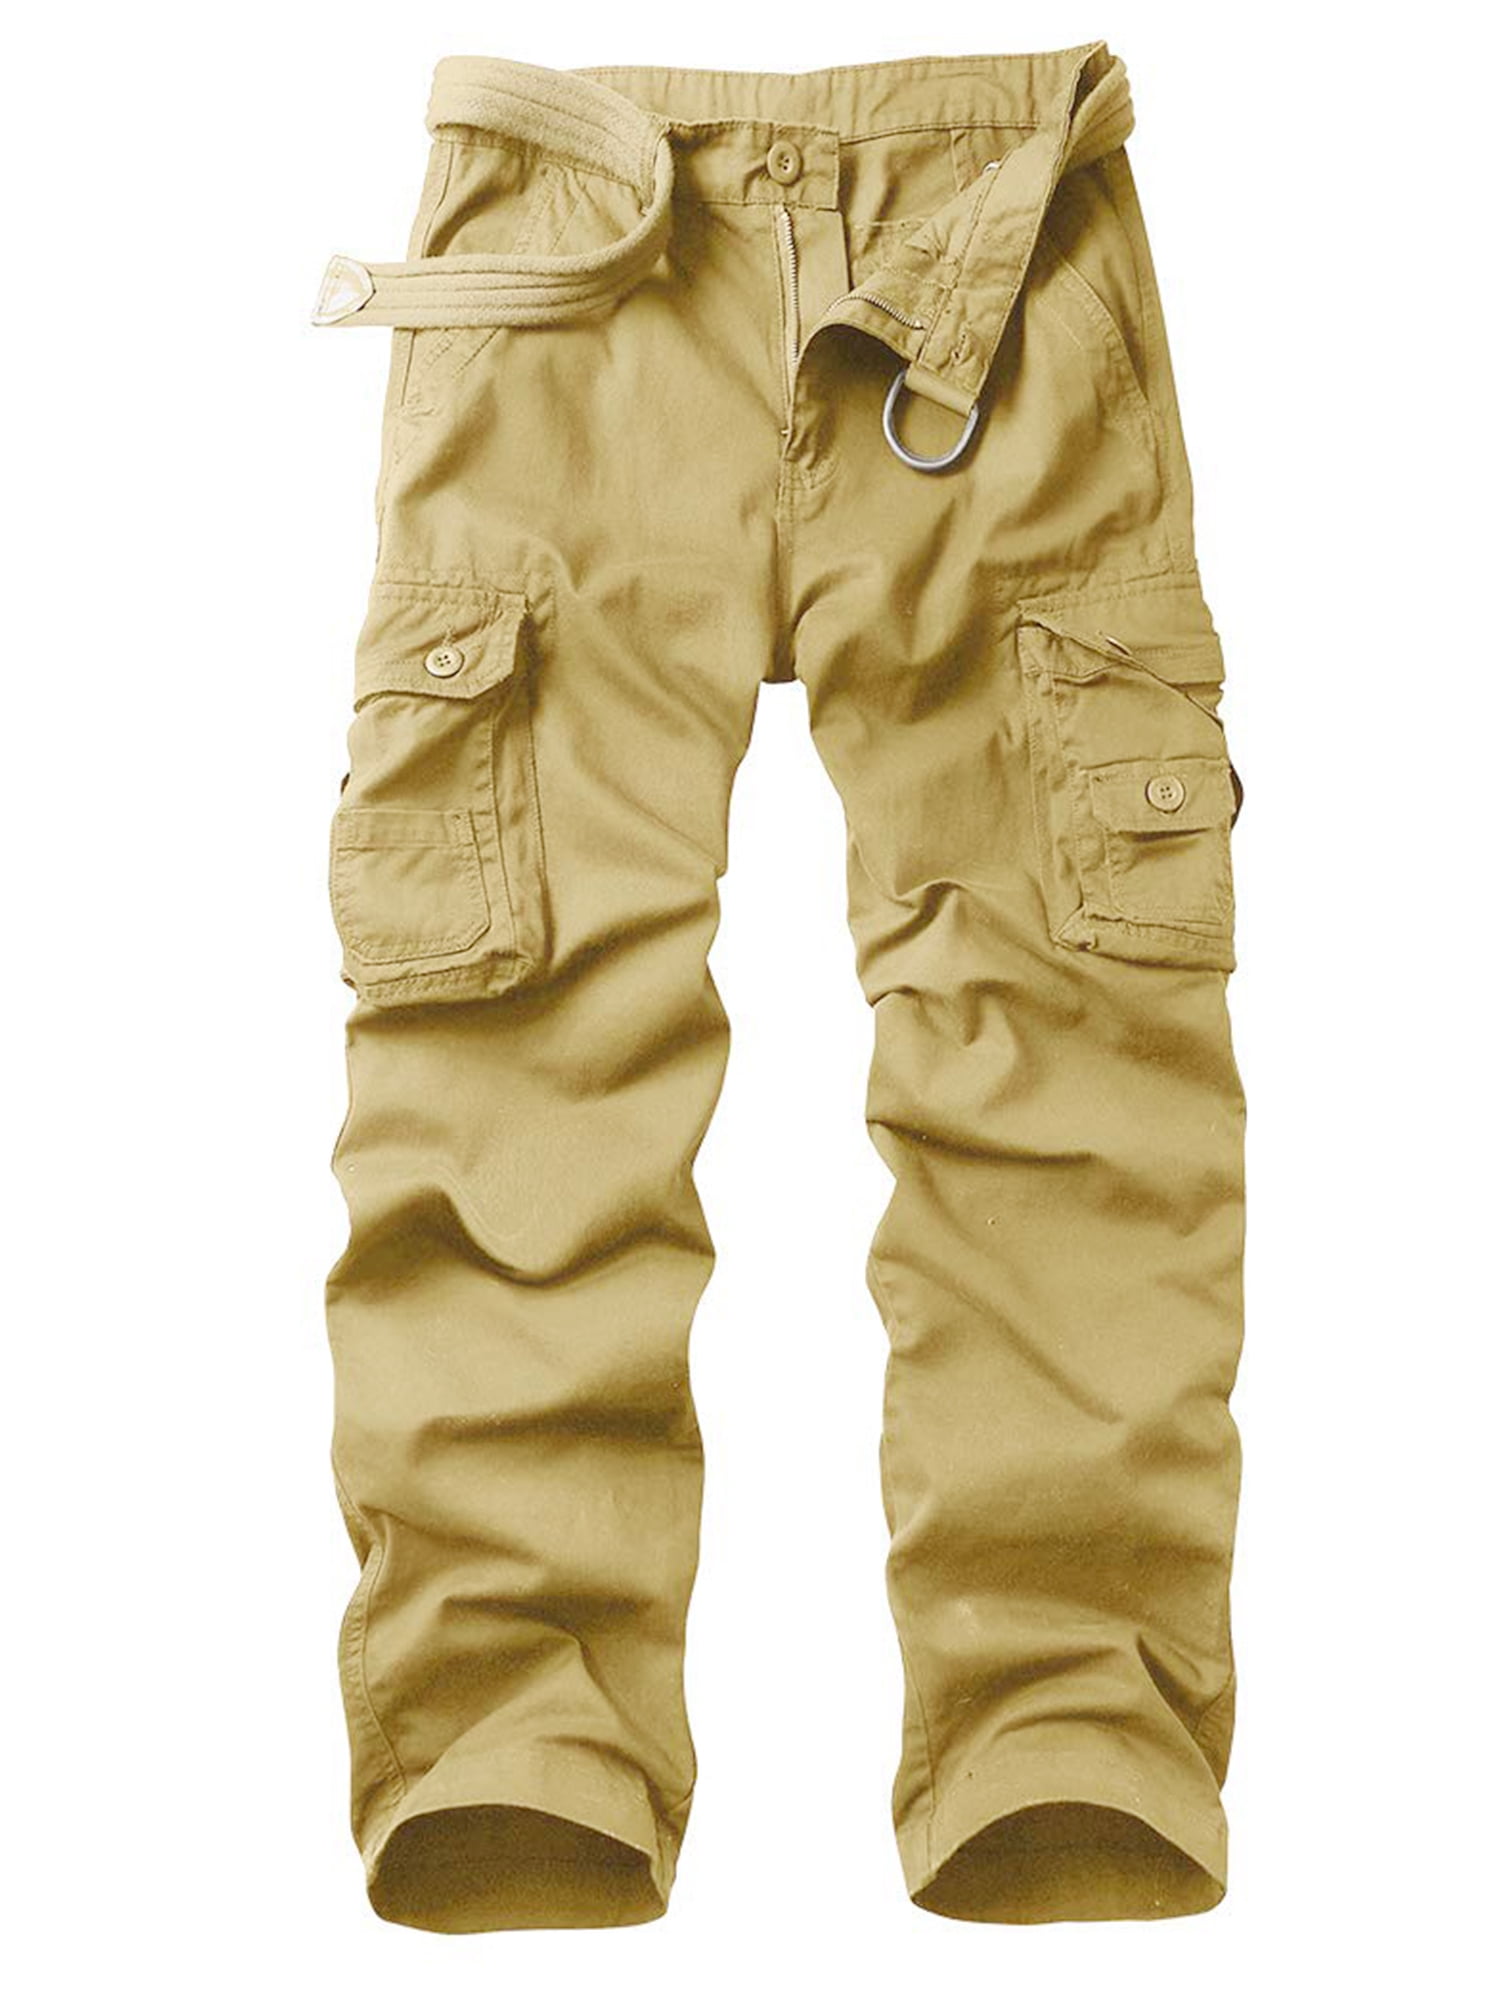 TRGPSG Men's Cargo Pants with Multi Pockets Outdoor Cotton Work Pants ...